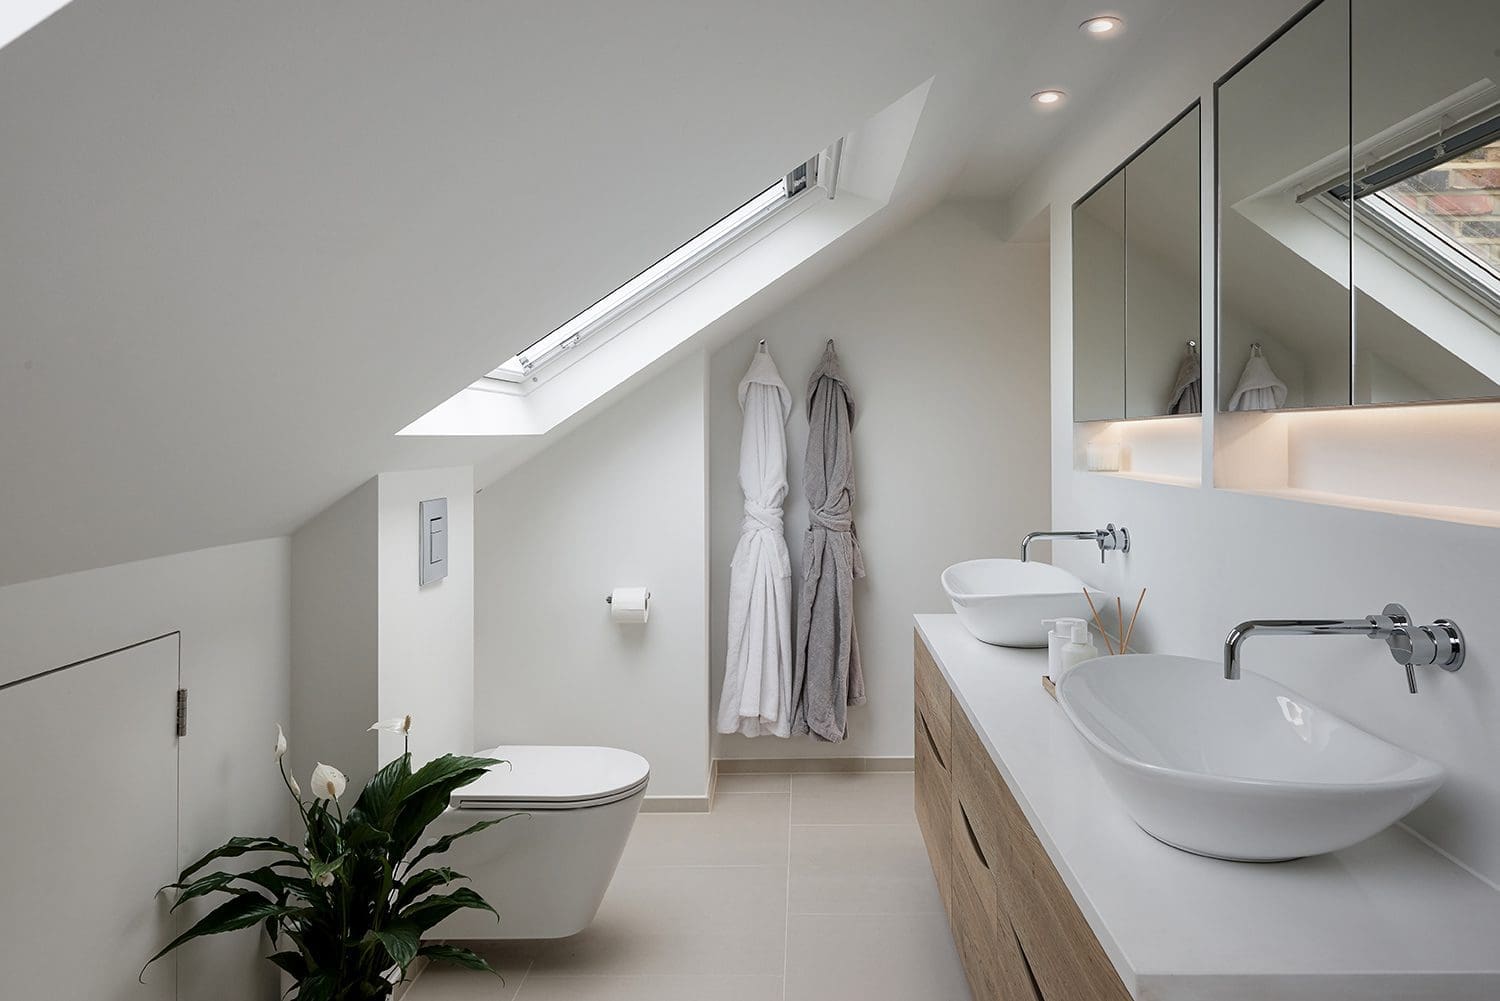 add value to your home by converting your loft into luxury bathroom with dual sinks